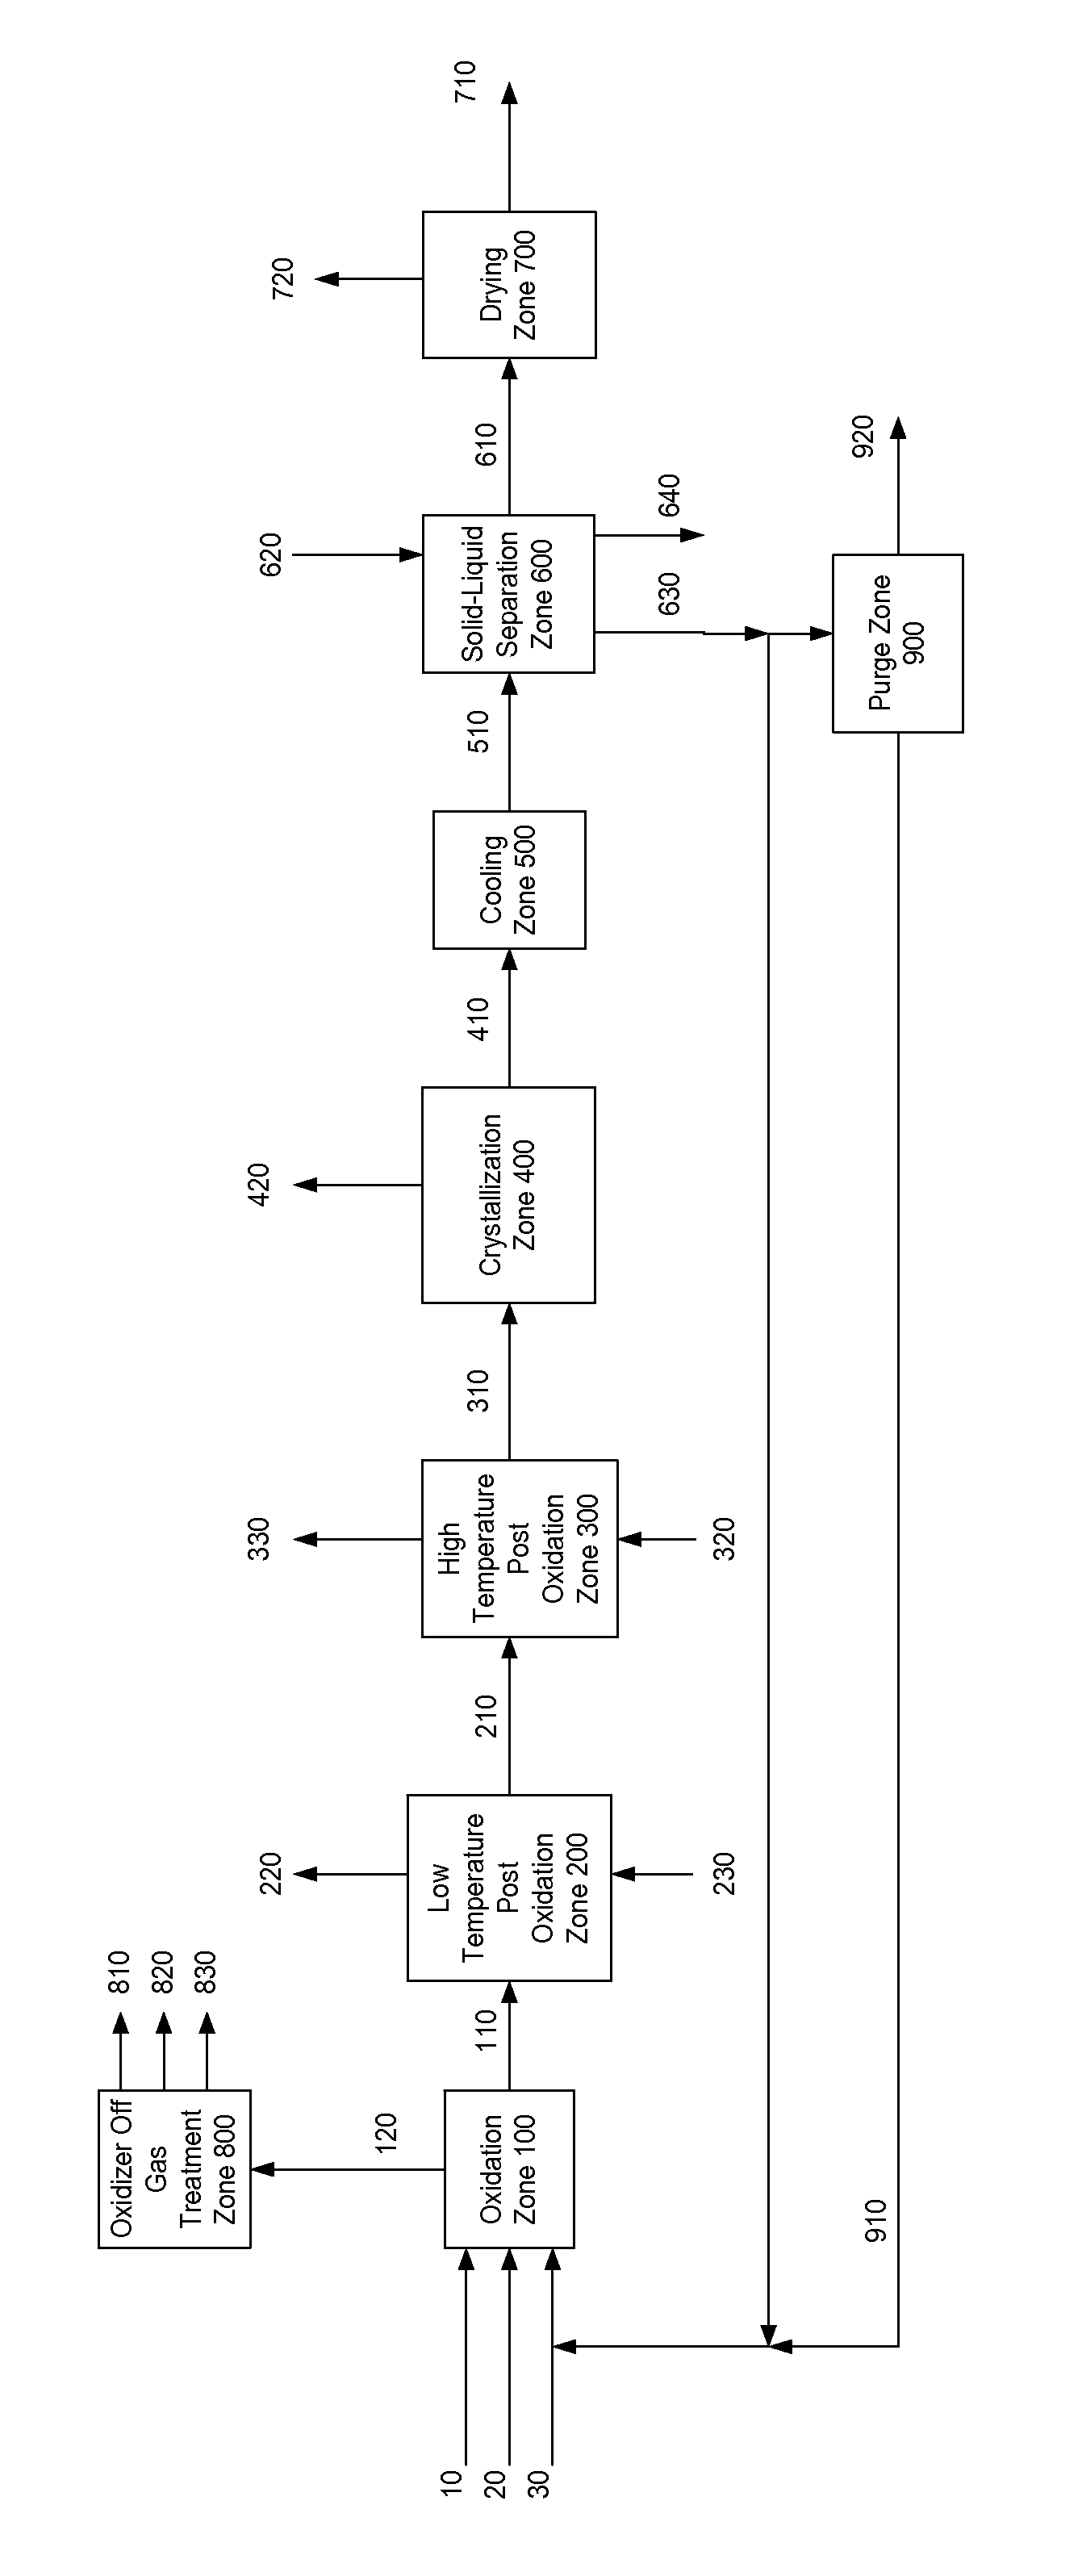 Oxidative purification method for producing purified dry furan-2,5-dicarboxylic acid